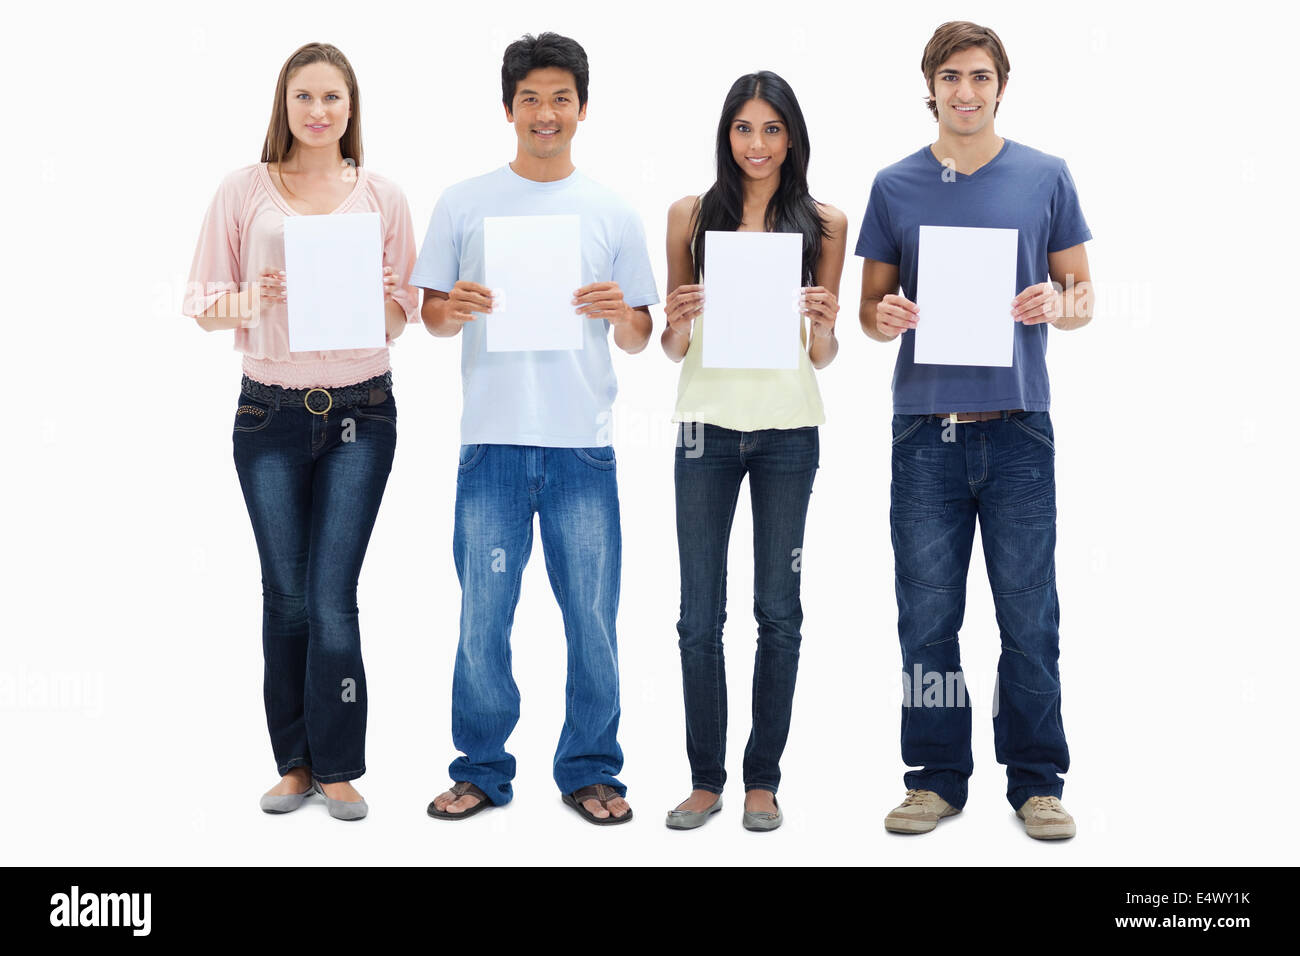 Four people in jeans holding signs Stock Photo